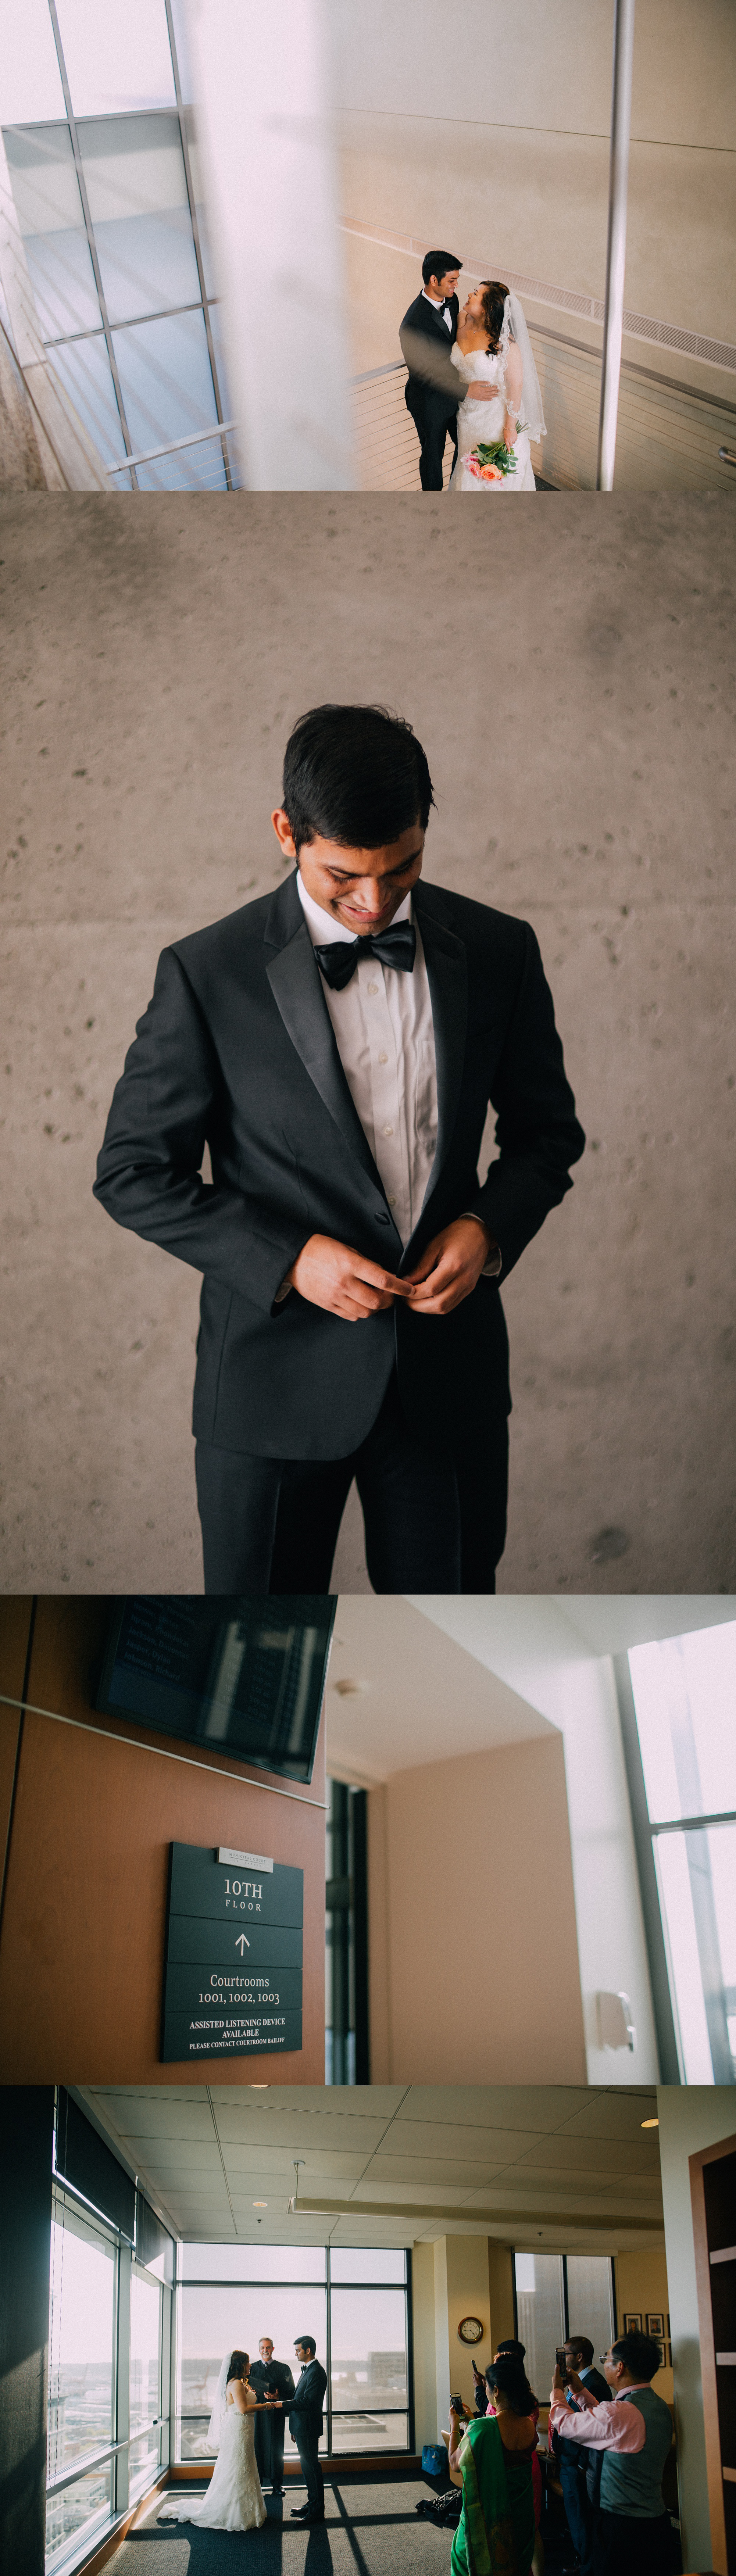 seattle courthouse and elopement photographer wedding-3.jpg